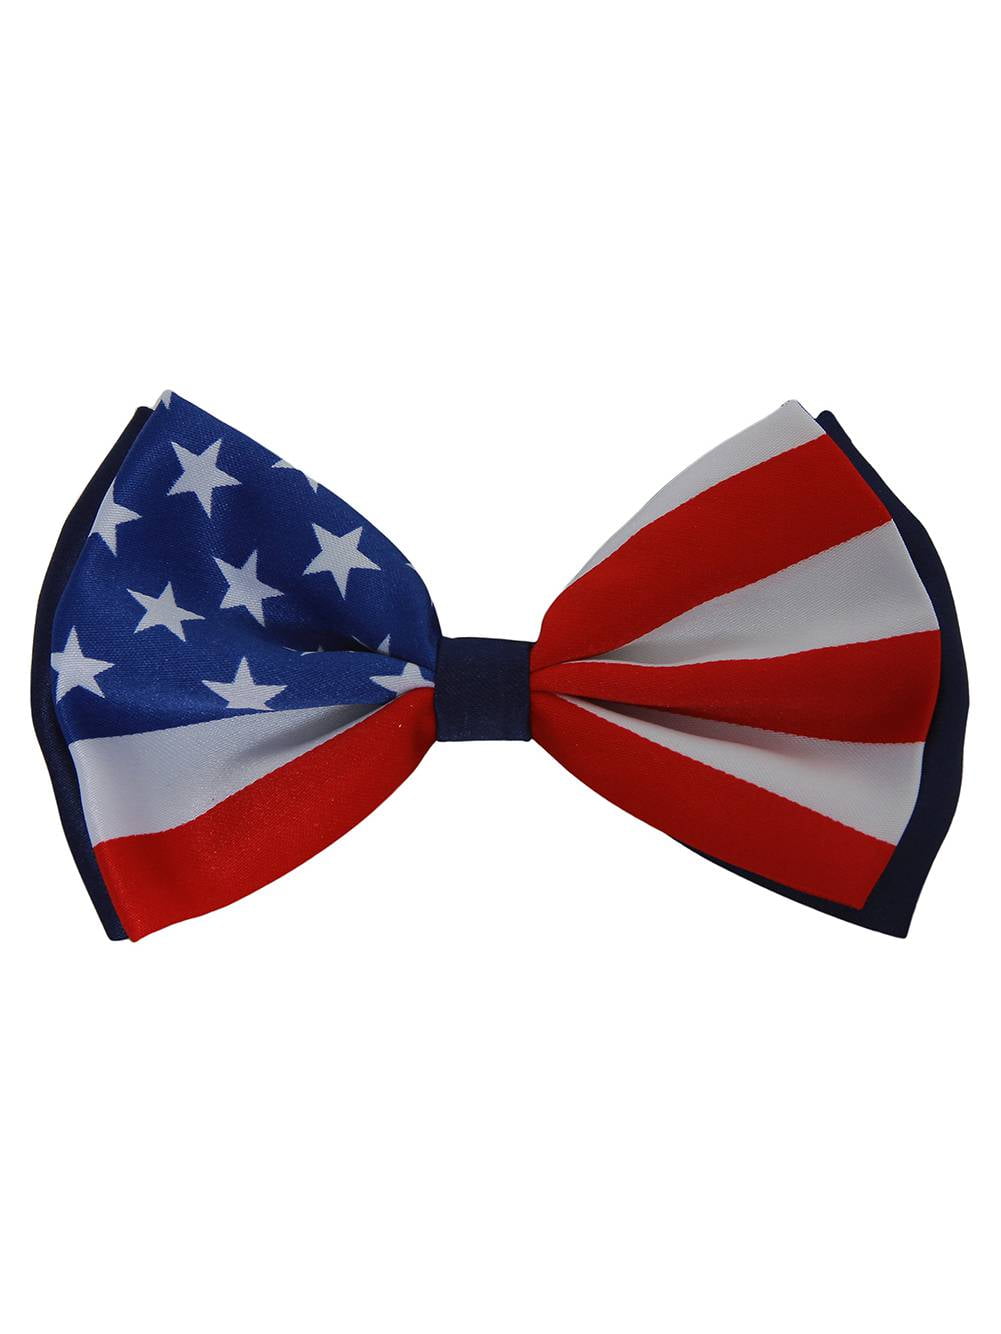 RED WHITE BLUE Happy Stars & Stripes USA American Flag Patriotic Adult BOW TIE 